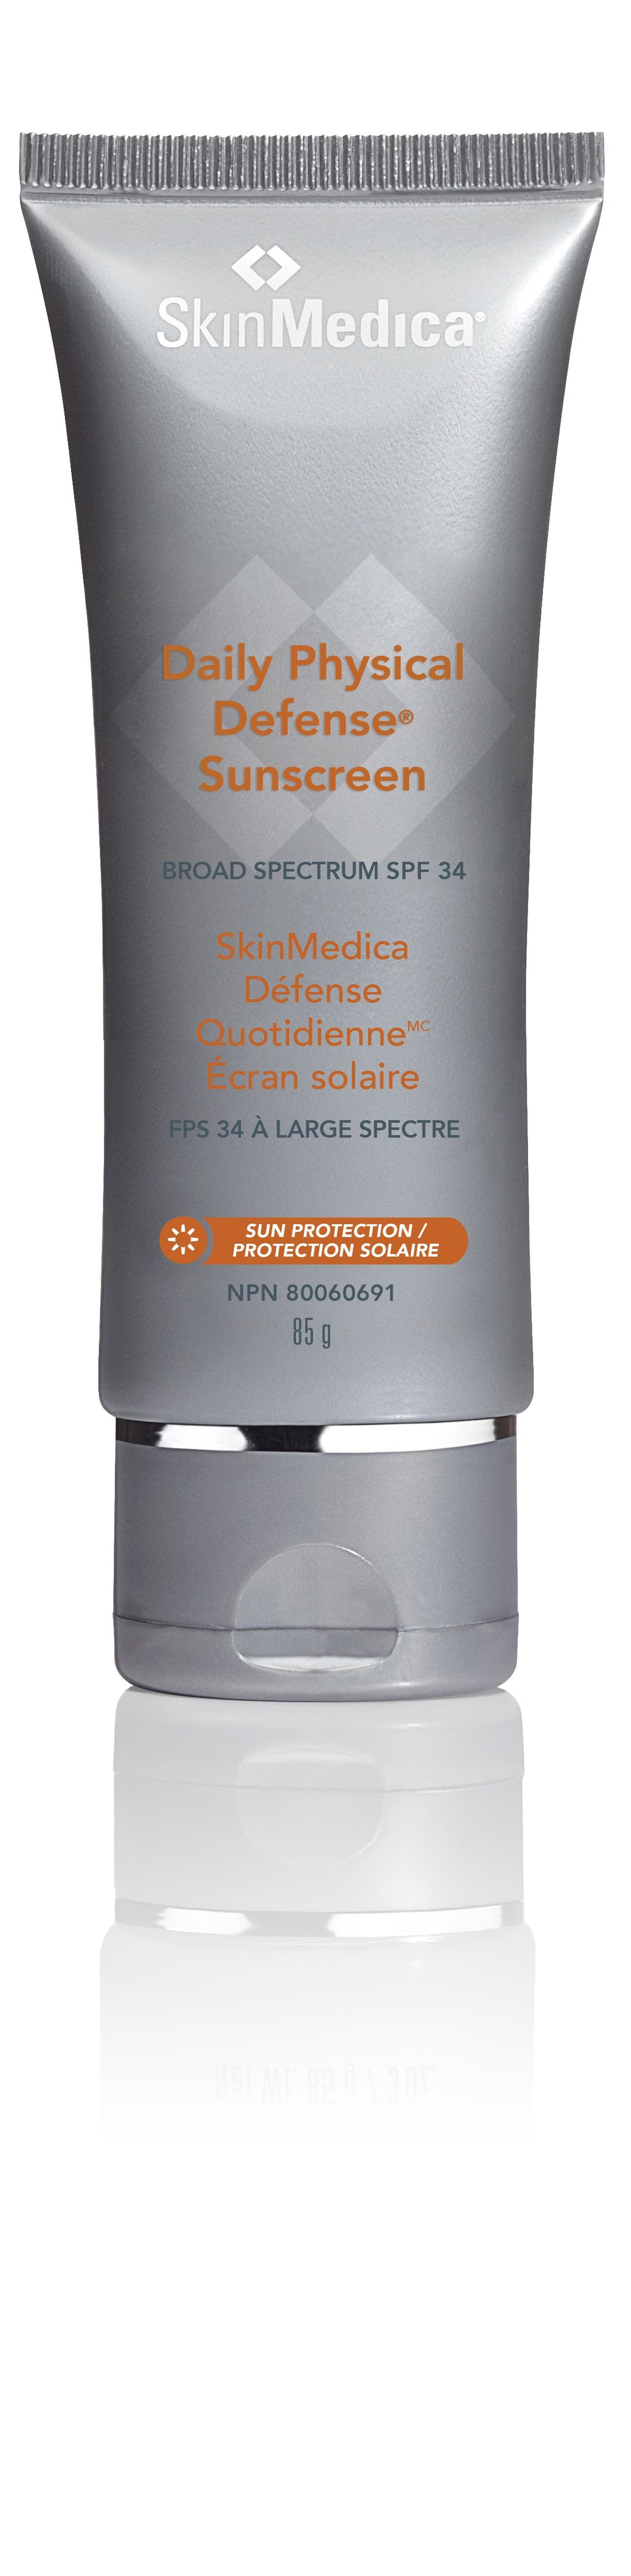 SkinMedica Daily Physical Defense® Sunscreen (Broad Spectrum SPF 34)